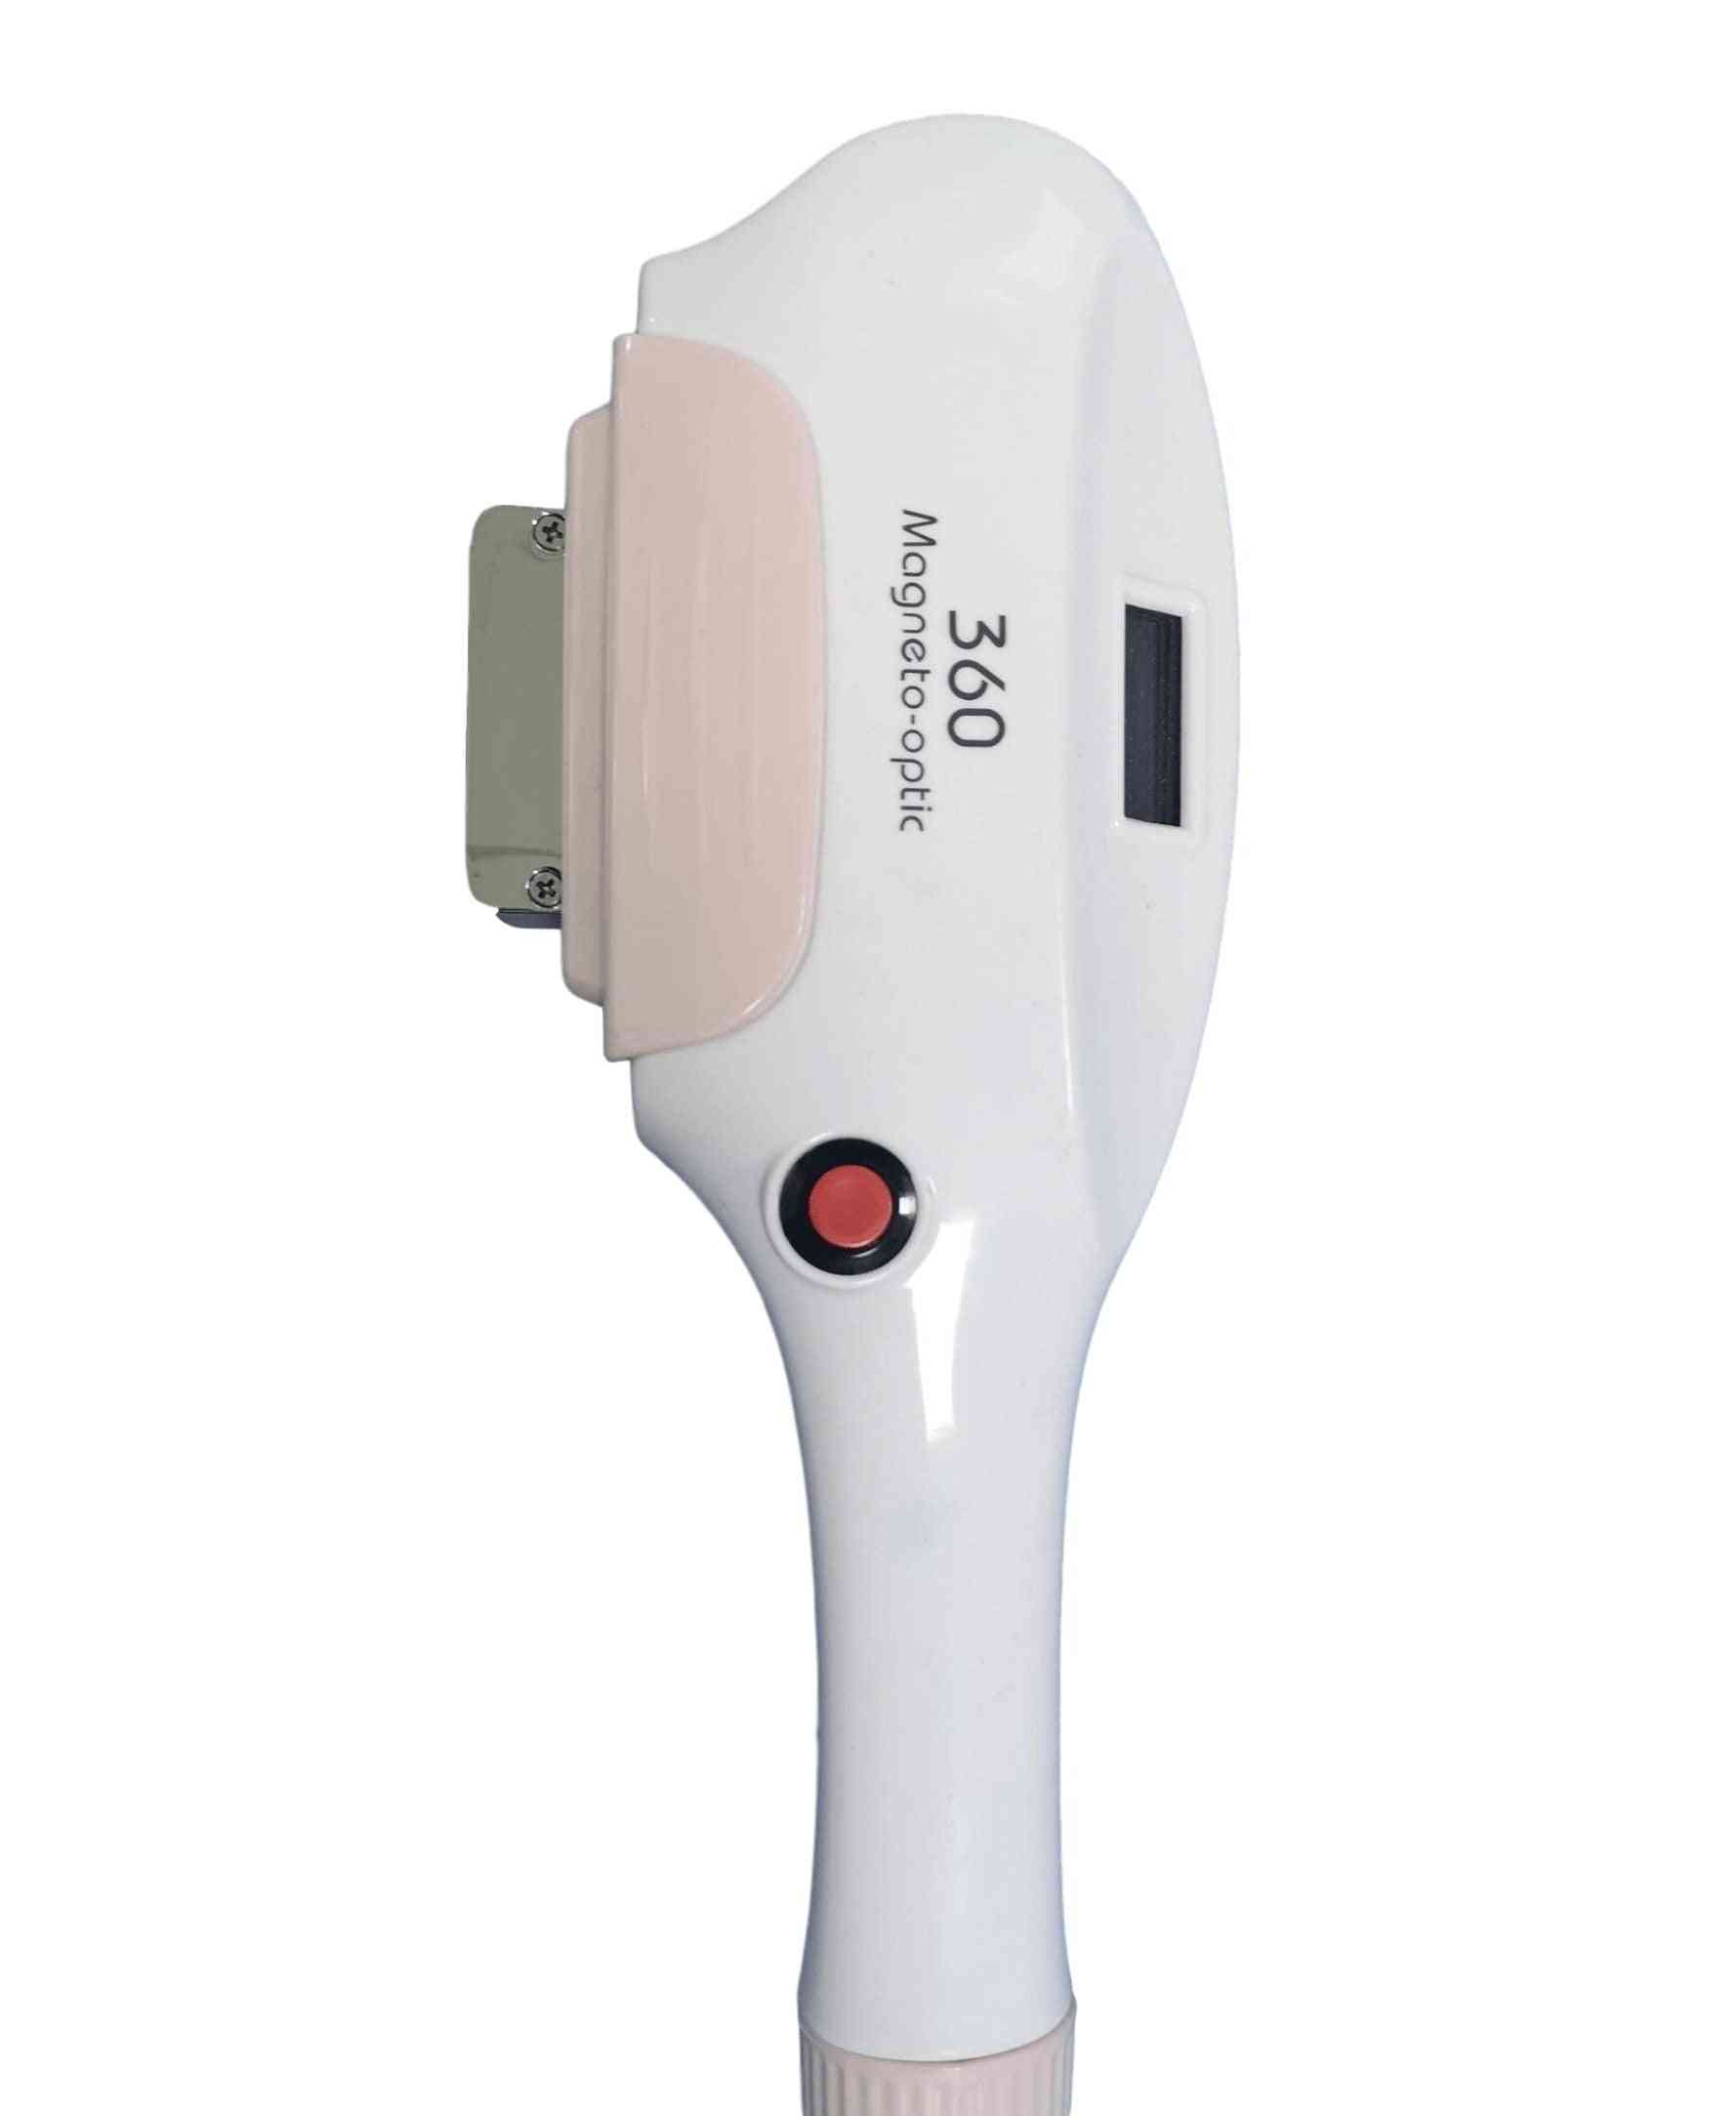 Laser Hair Removal Handle Beauty Instrument